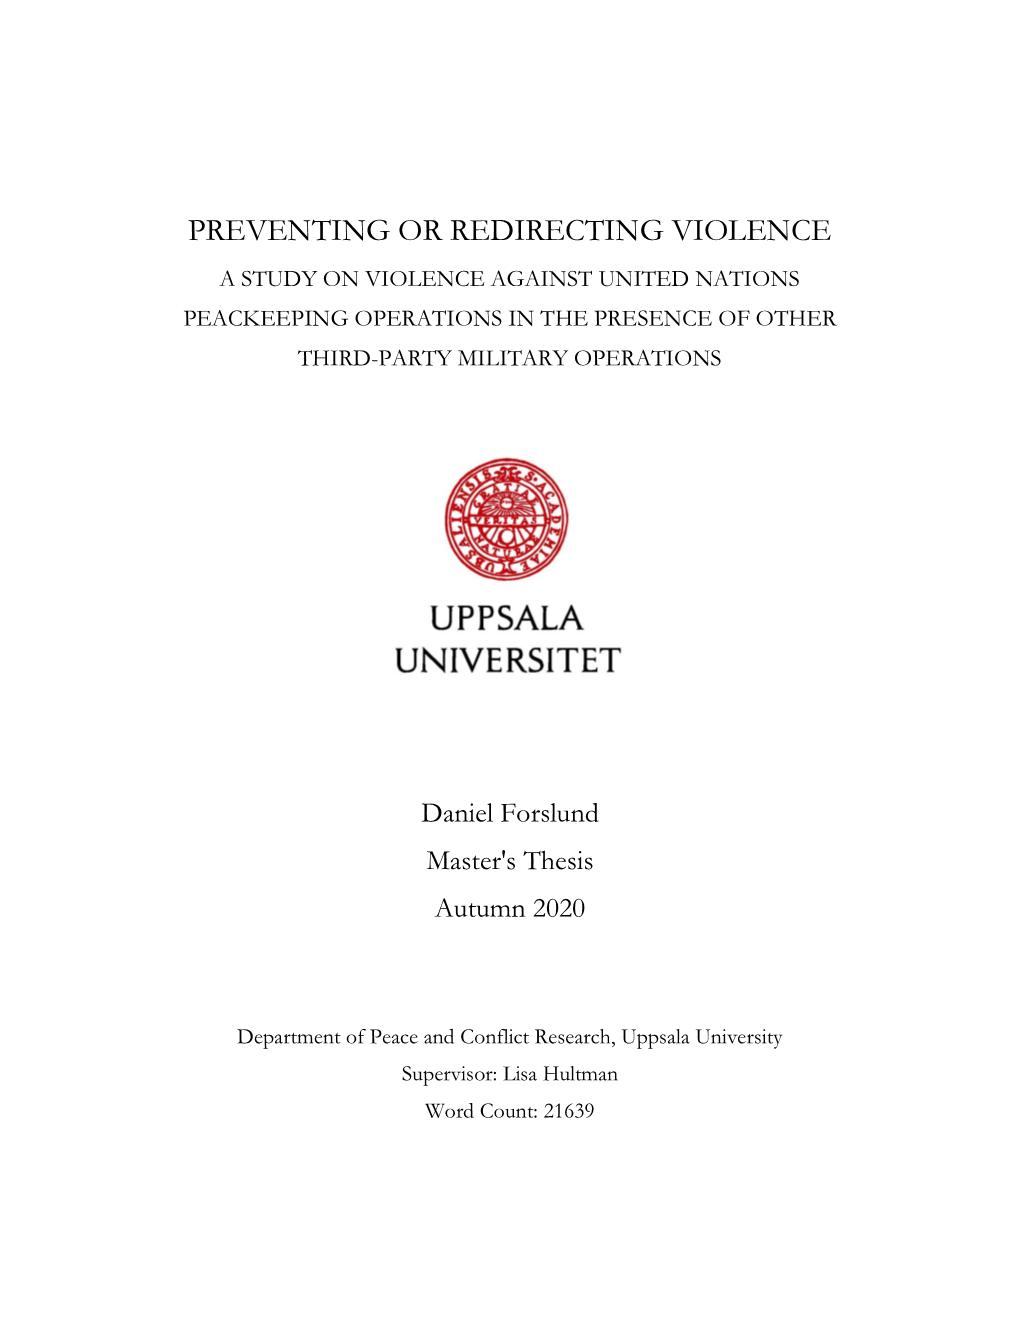 Preventing Or Redirecting Violence a Study on Violence Against United Nations Peackeeping Operations in the Presence of Other Third-Party Military Operations